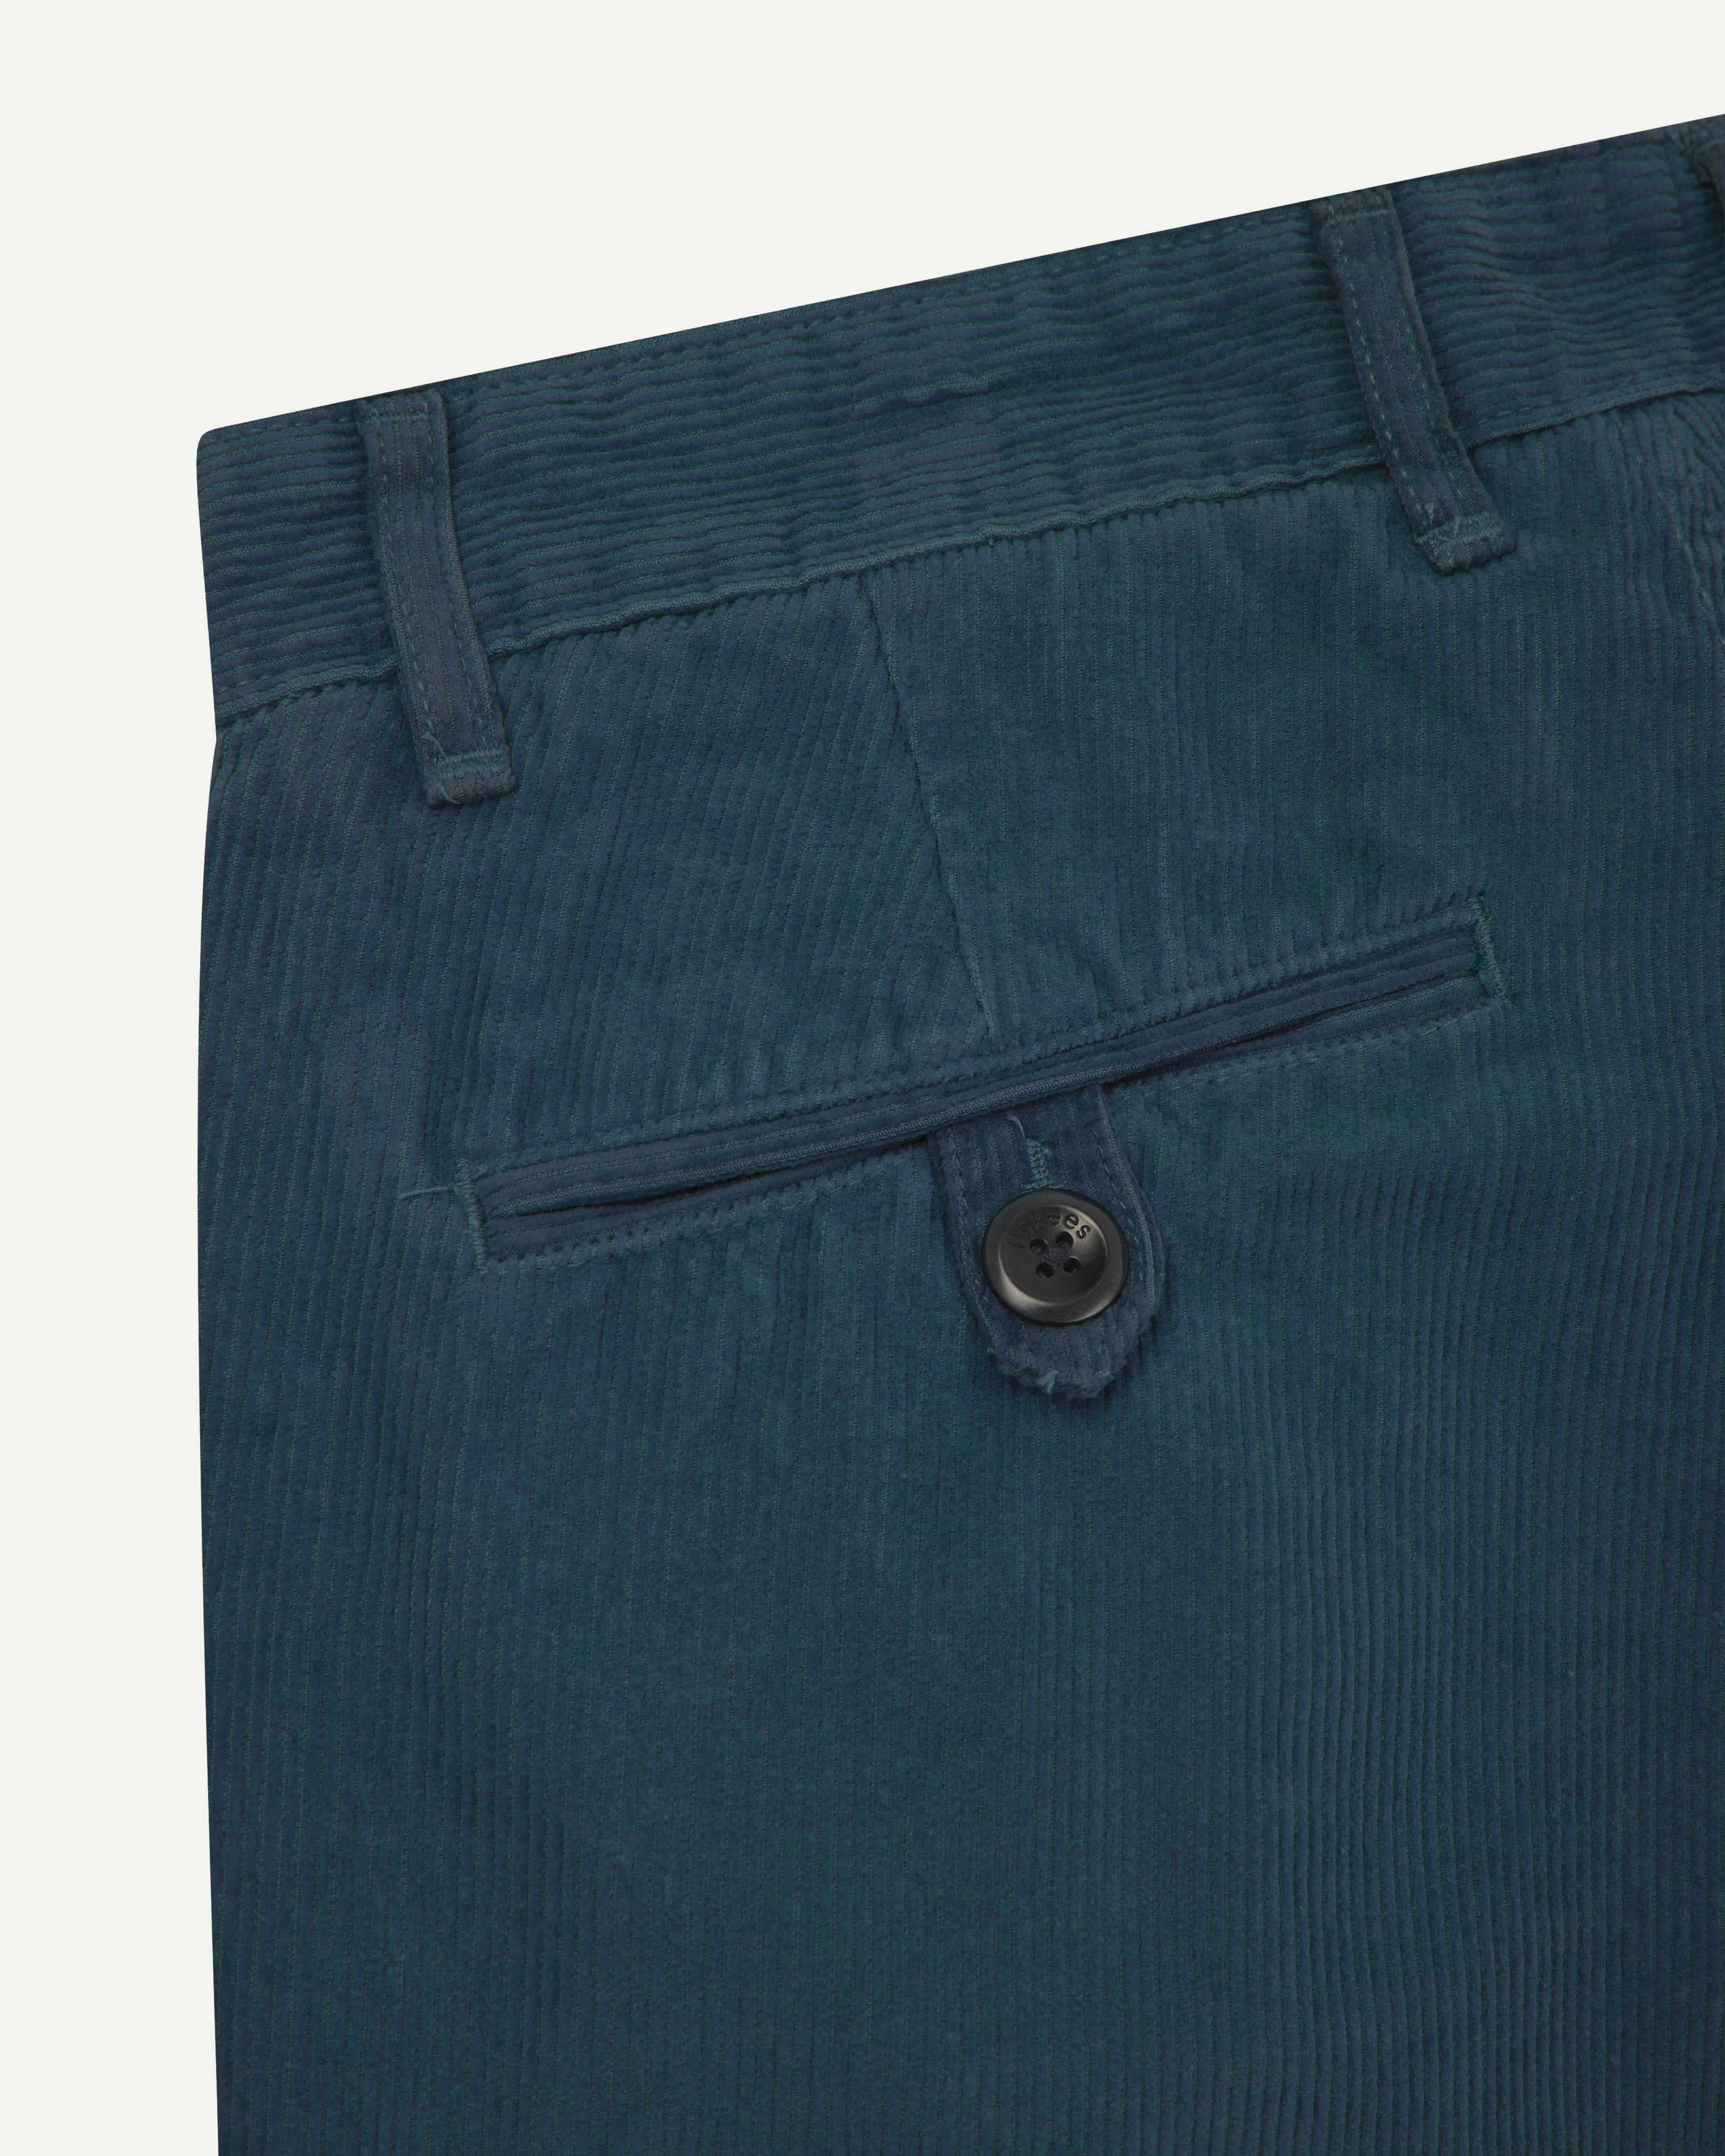 Close up back shot of Uskees 5018 cord boat pants in petrol blue.